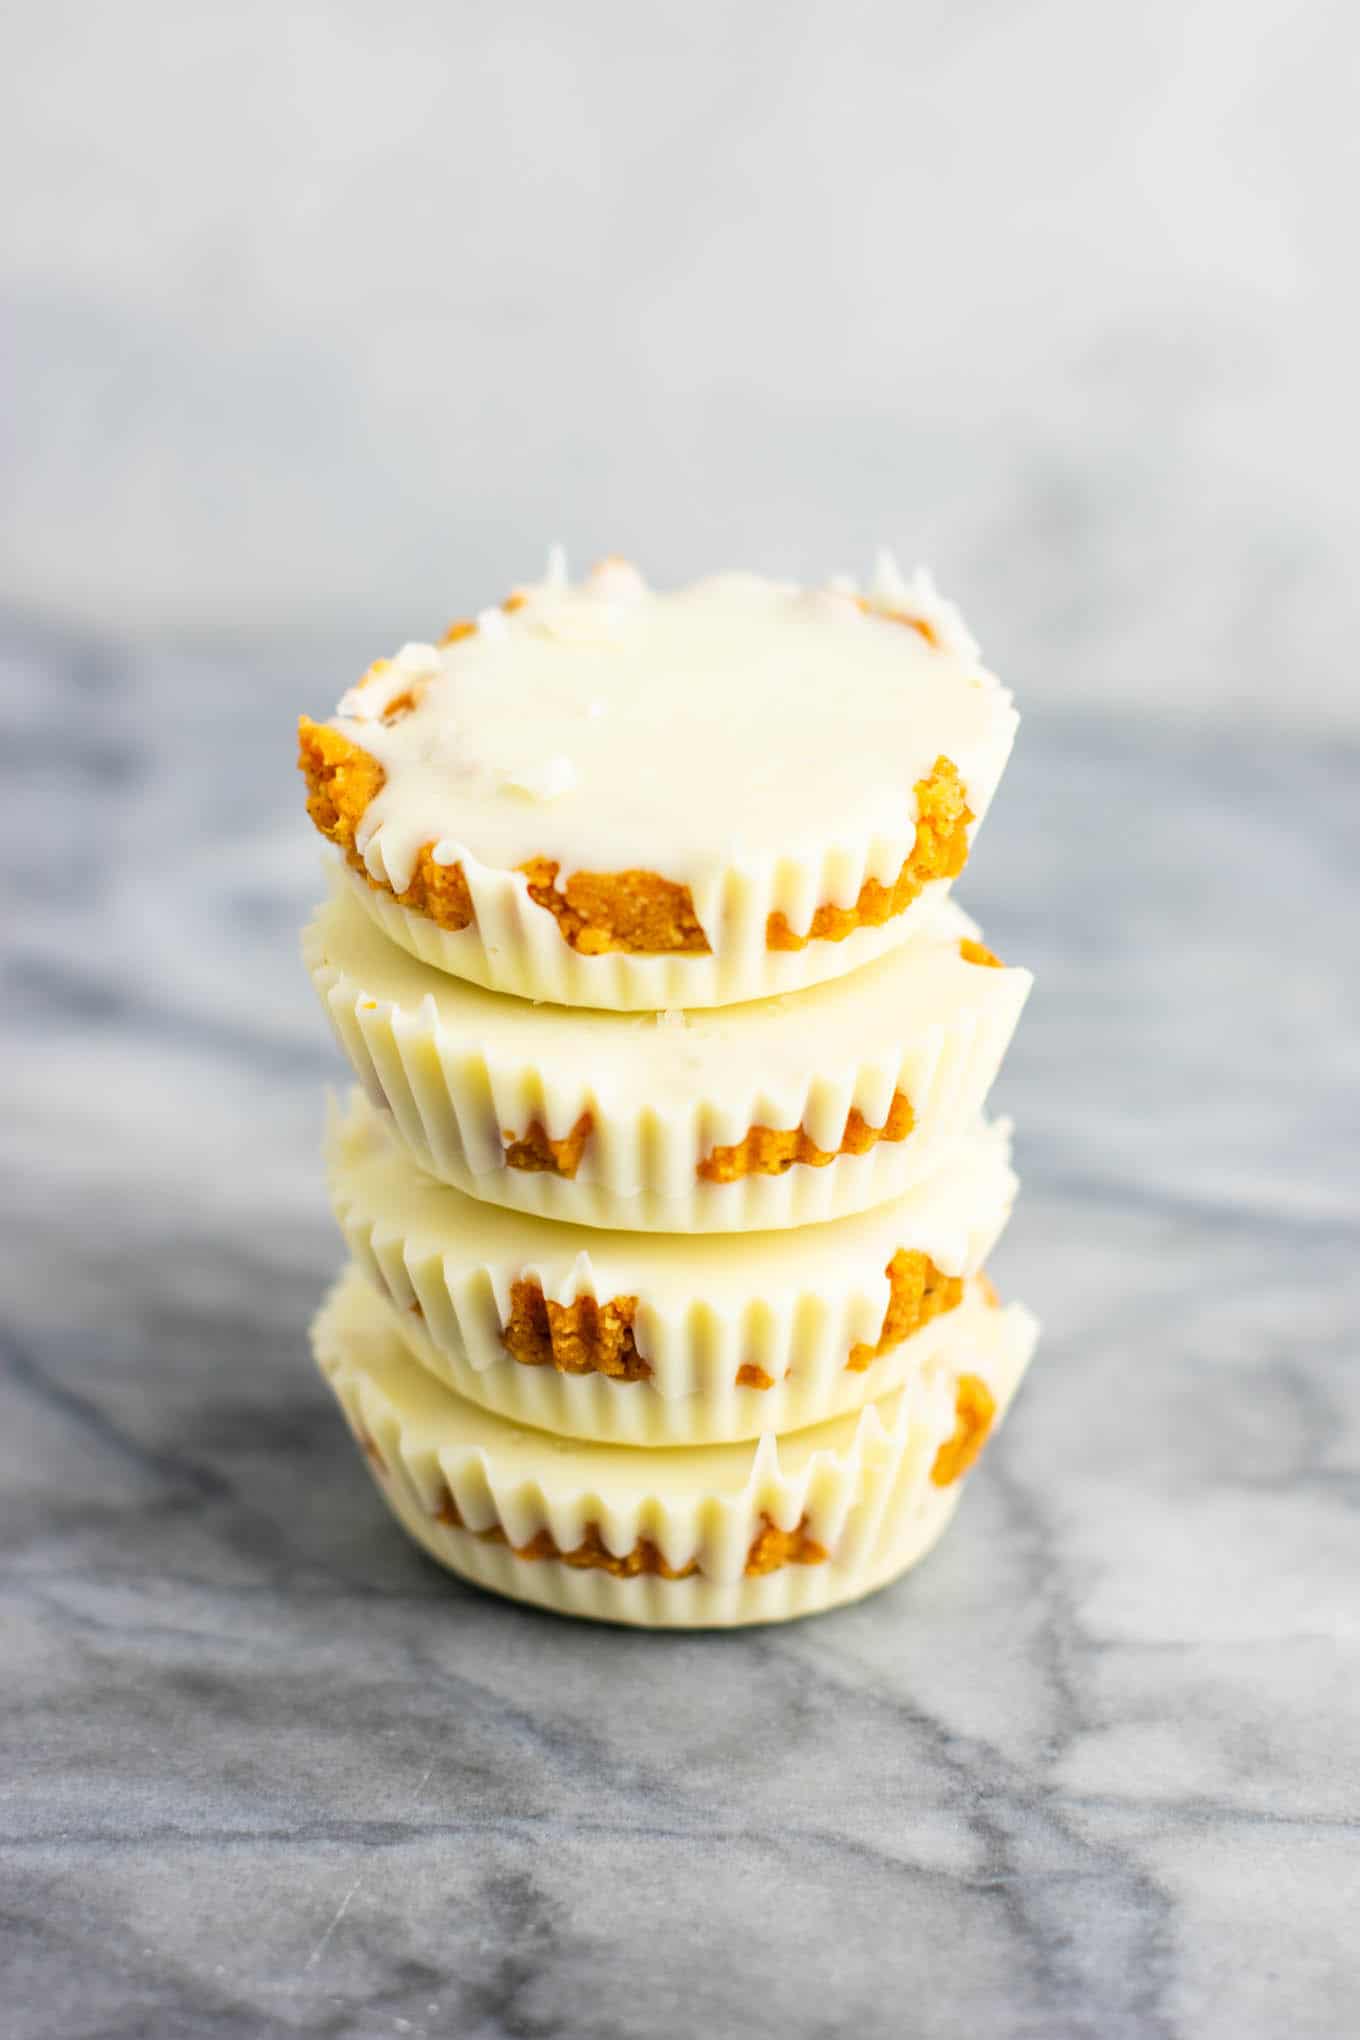 Gluten free white chocolate pumpkin cups â€“ if you love white chocolate you will go crazy for these! Like homemade reeseâ€™s cups but with pumpkin! #glutenfree #dessert #pumpkin #whitechocolate